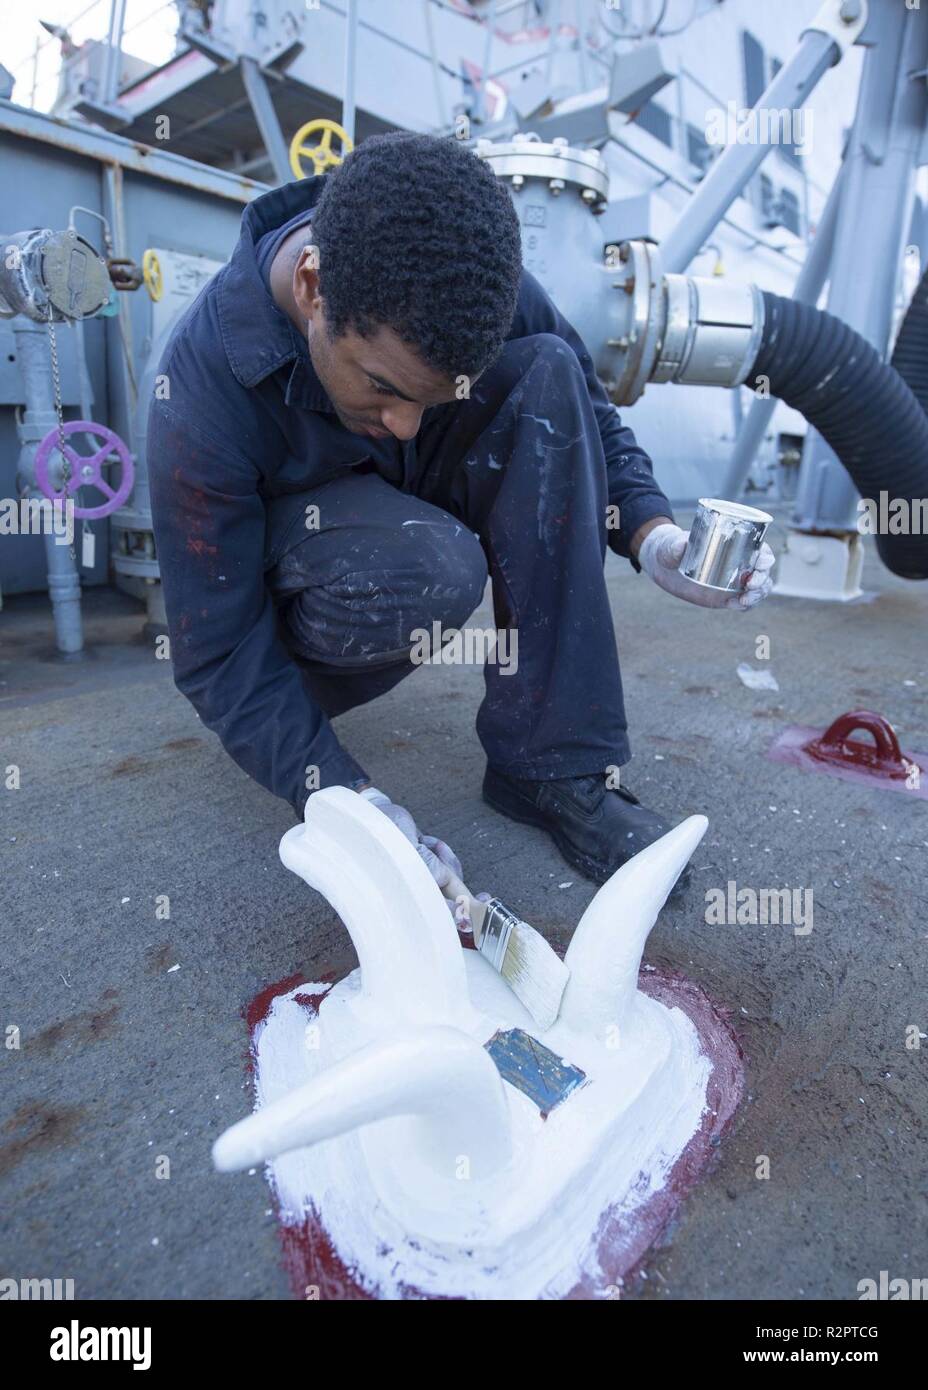 MEDITERRANEAN SEA (Oct. 29, 2018) Boatswain’s Mate 3rd Class Erick Anderson paints a deck fixture aboard the Arleigh Burke-class guided-missile destroyer USS Arleigh Burke (DDG 51) in the Mediterranean Sea Oct. 29, 2018. Arleigh Burke, homeported at Naval Station Norfolk, is conducting naval operations in the U.S. 6th Fleet area of operations in support of U.S. national security interests in Europe and Africa. Stock Photo